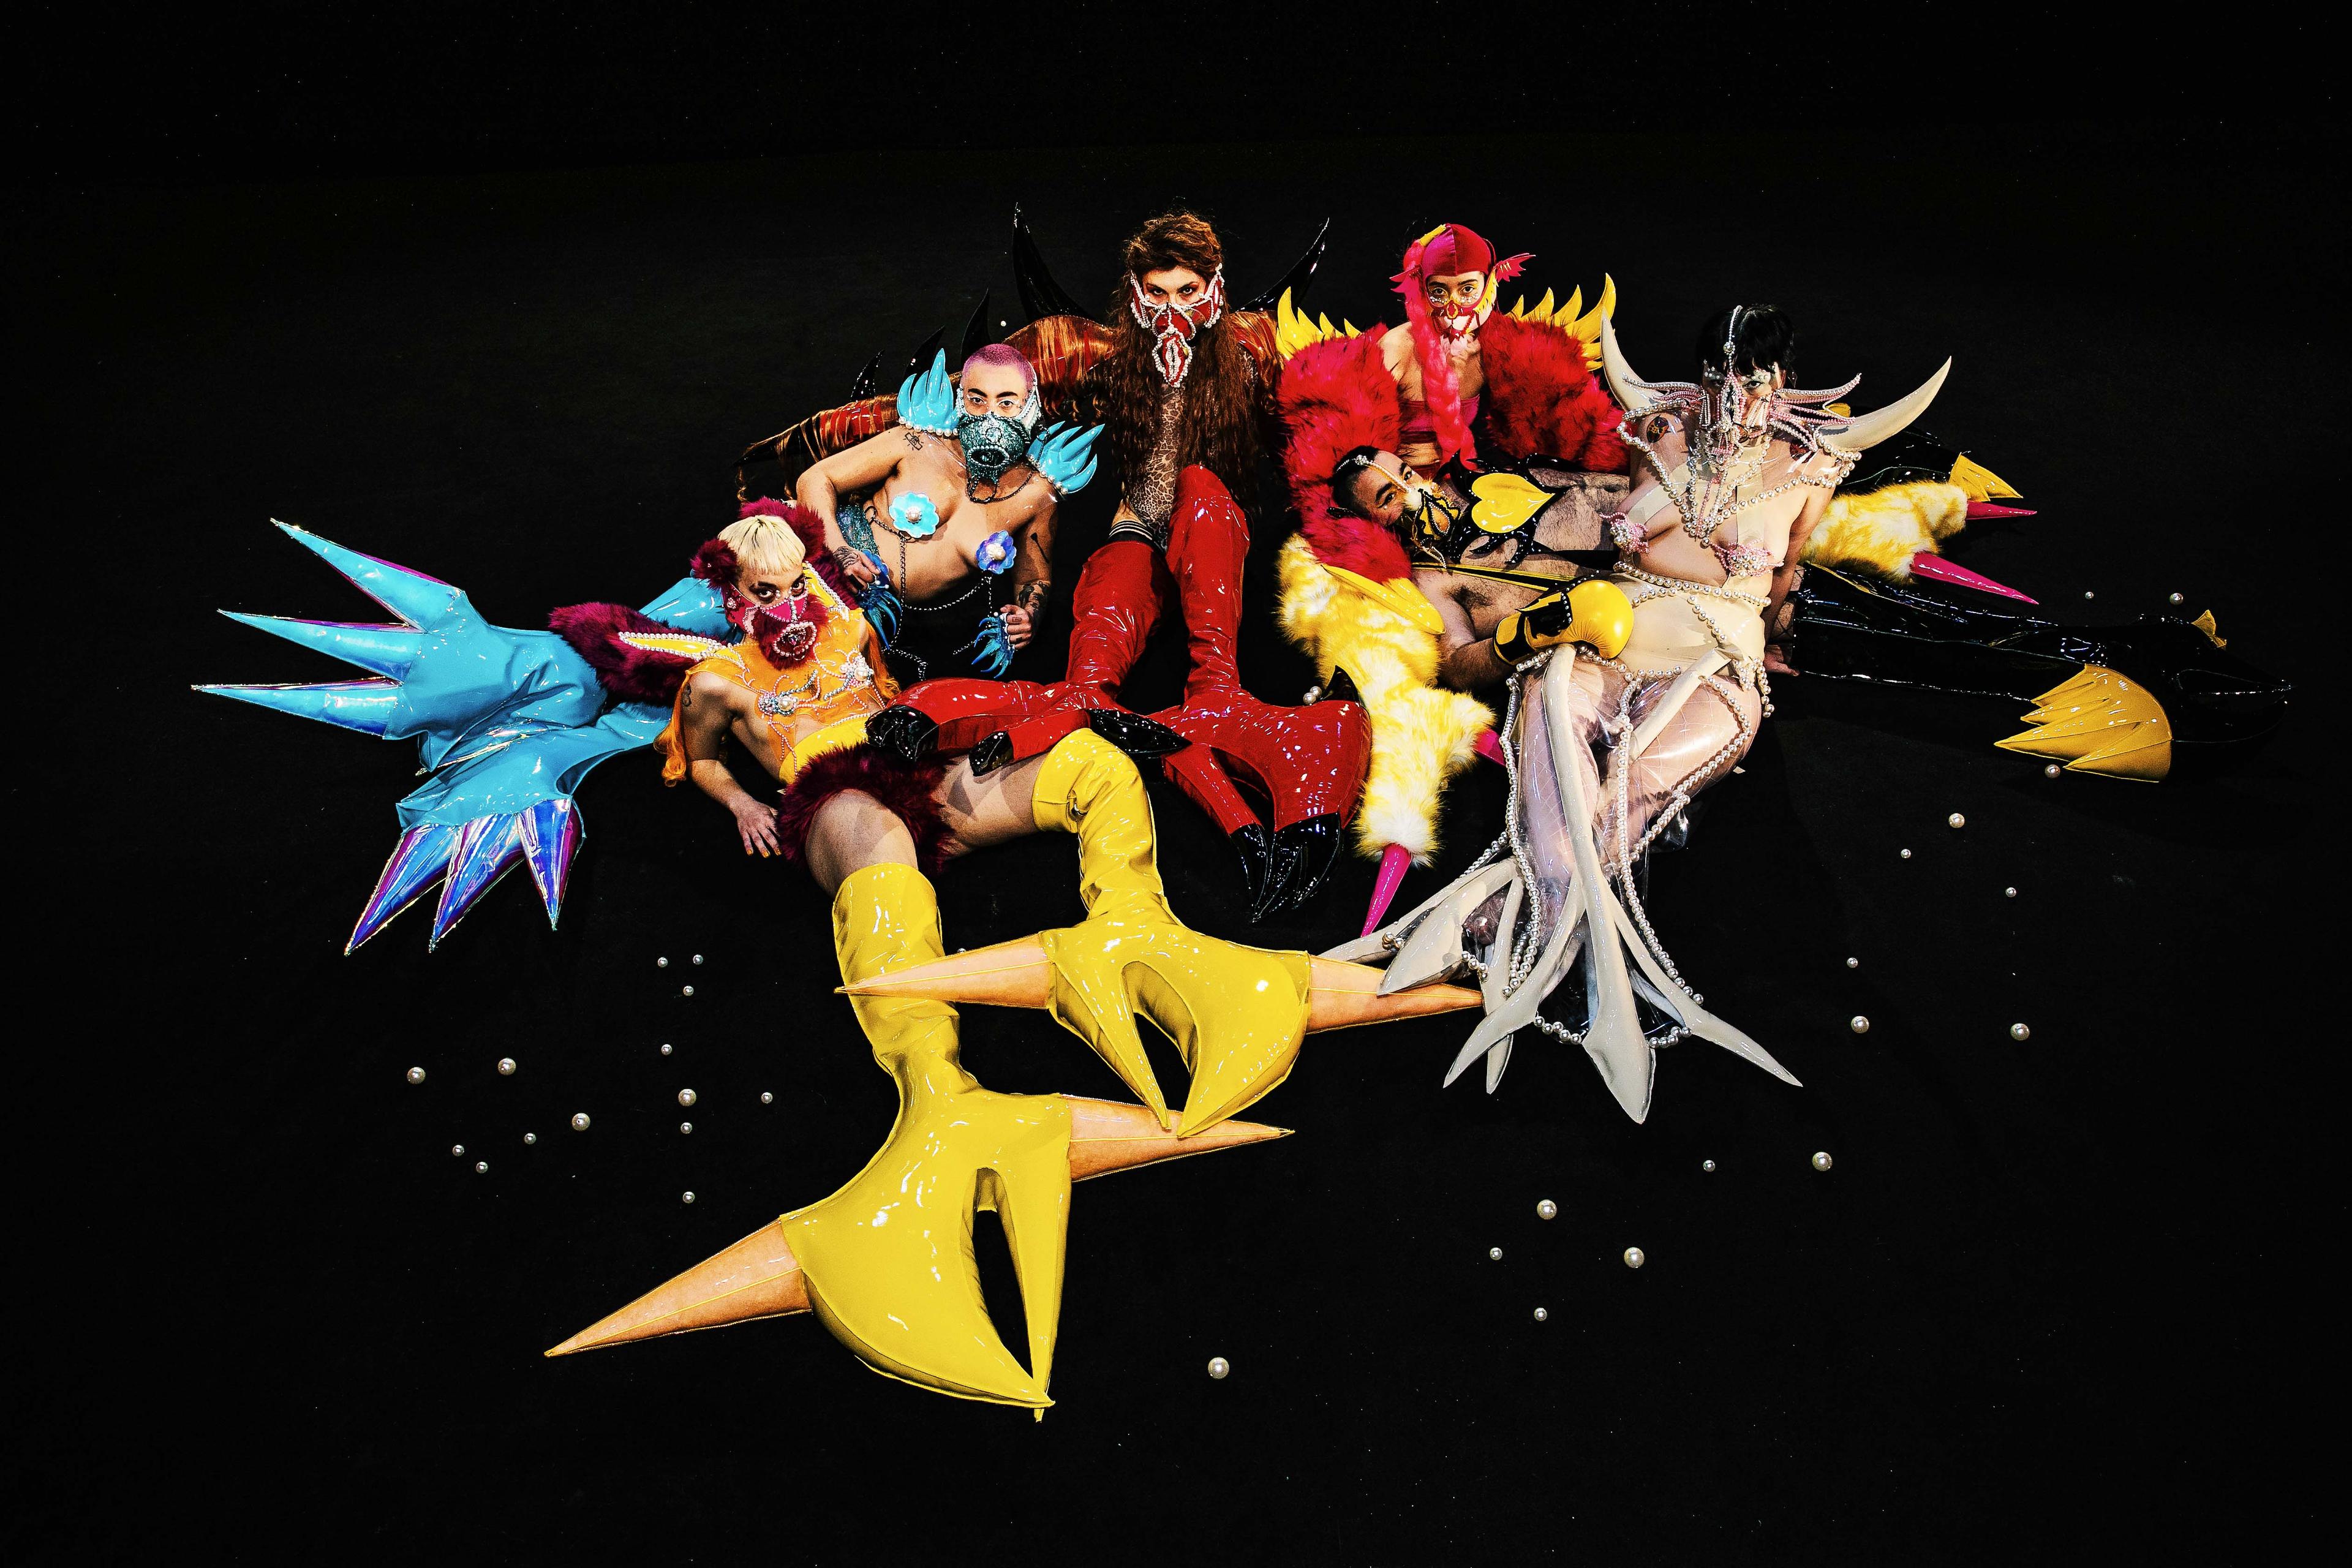 Six human-like creatures who look like superheroes are lying close to each other on a black background. Each creature is wearing a vibrant coloured vinyl bodysuit with knee-high vinyl boots with large platforms which elongate the limbs, fur details, shiny